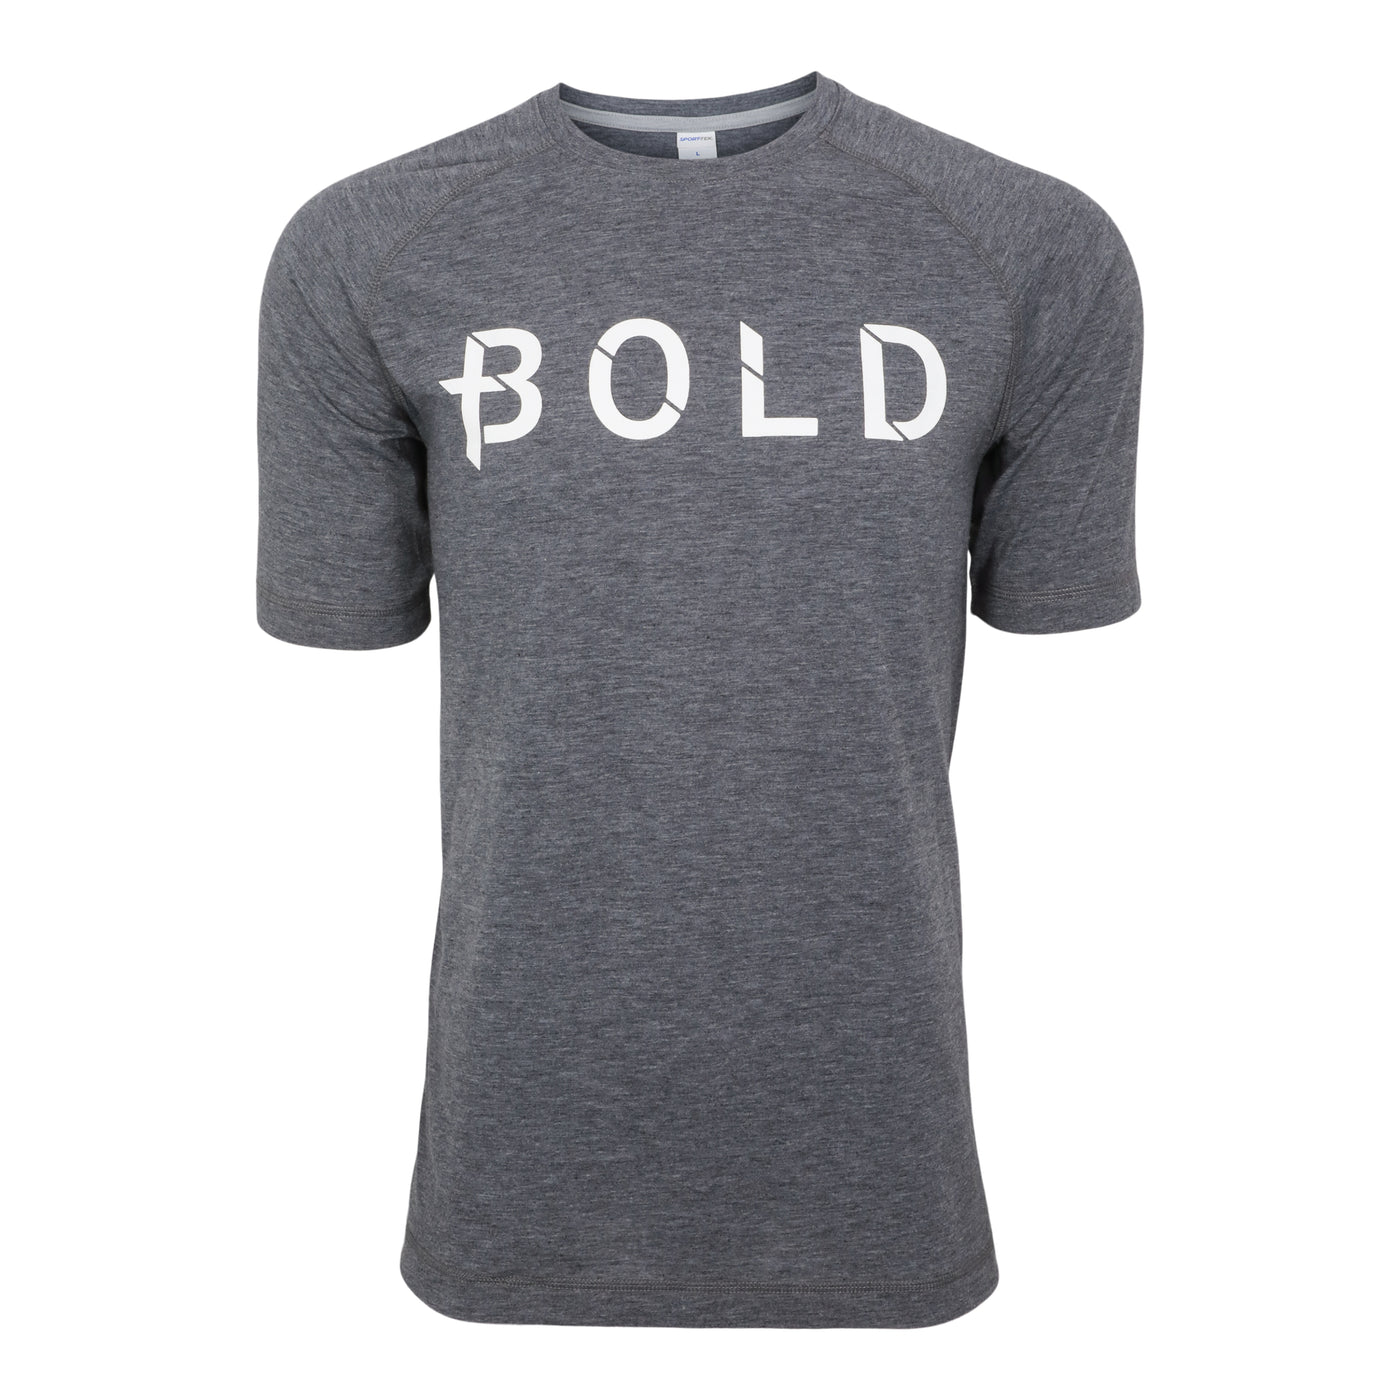 Created Men's Bold Compete dark grey short sleeve t-shirt front view